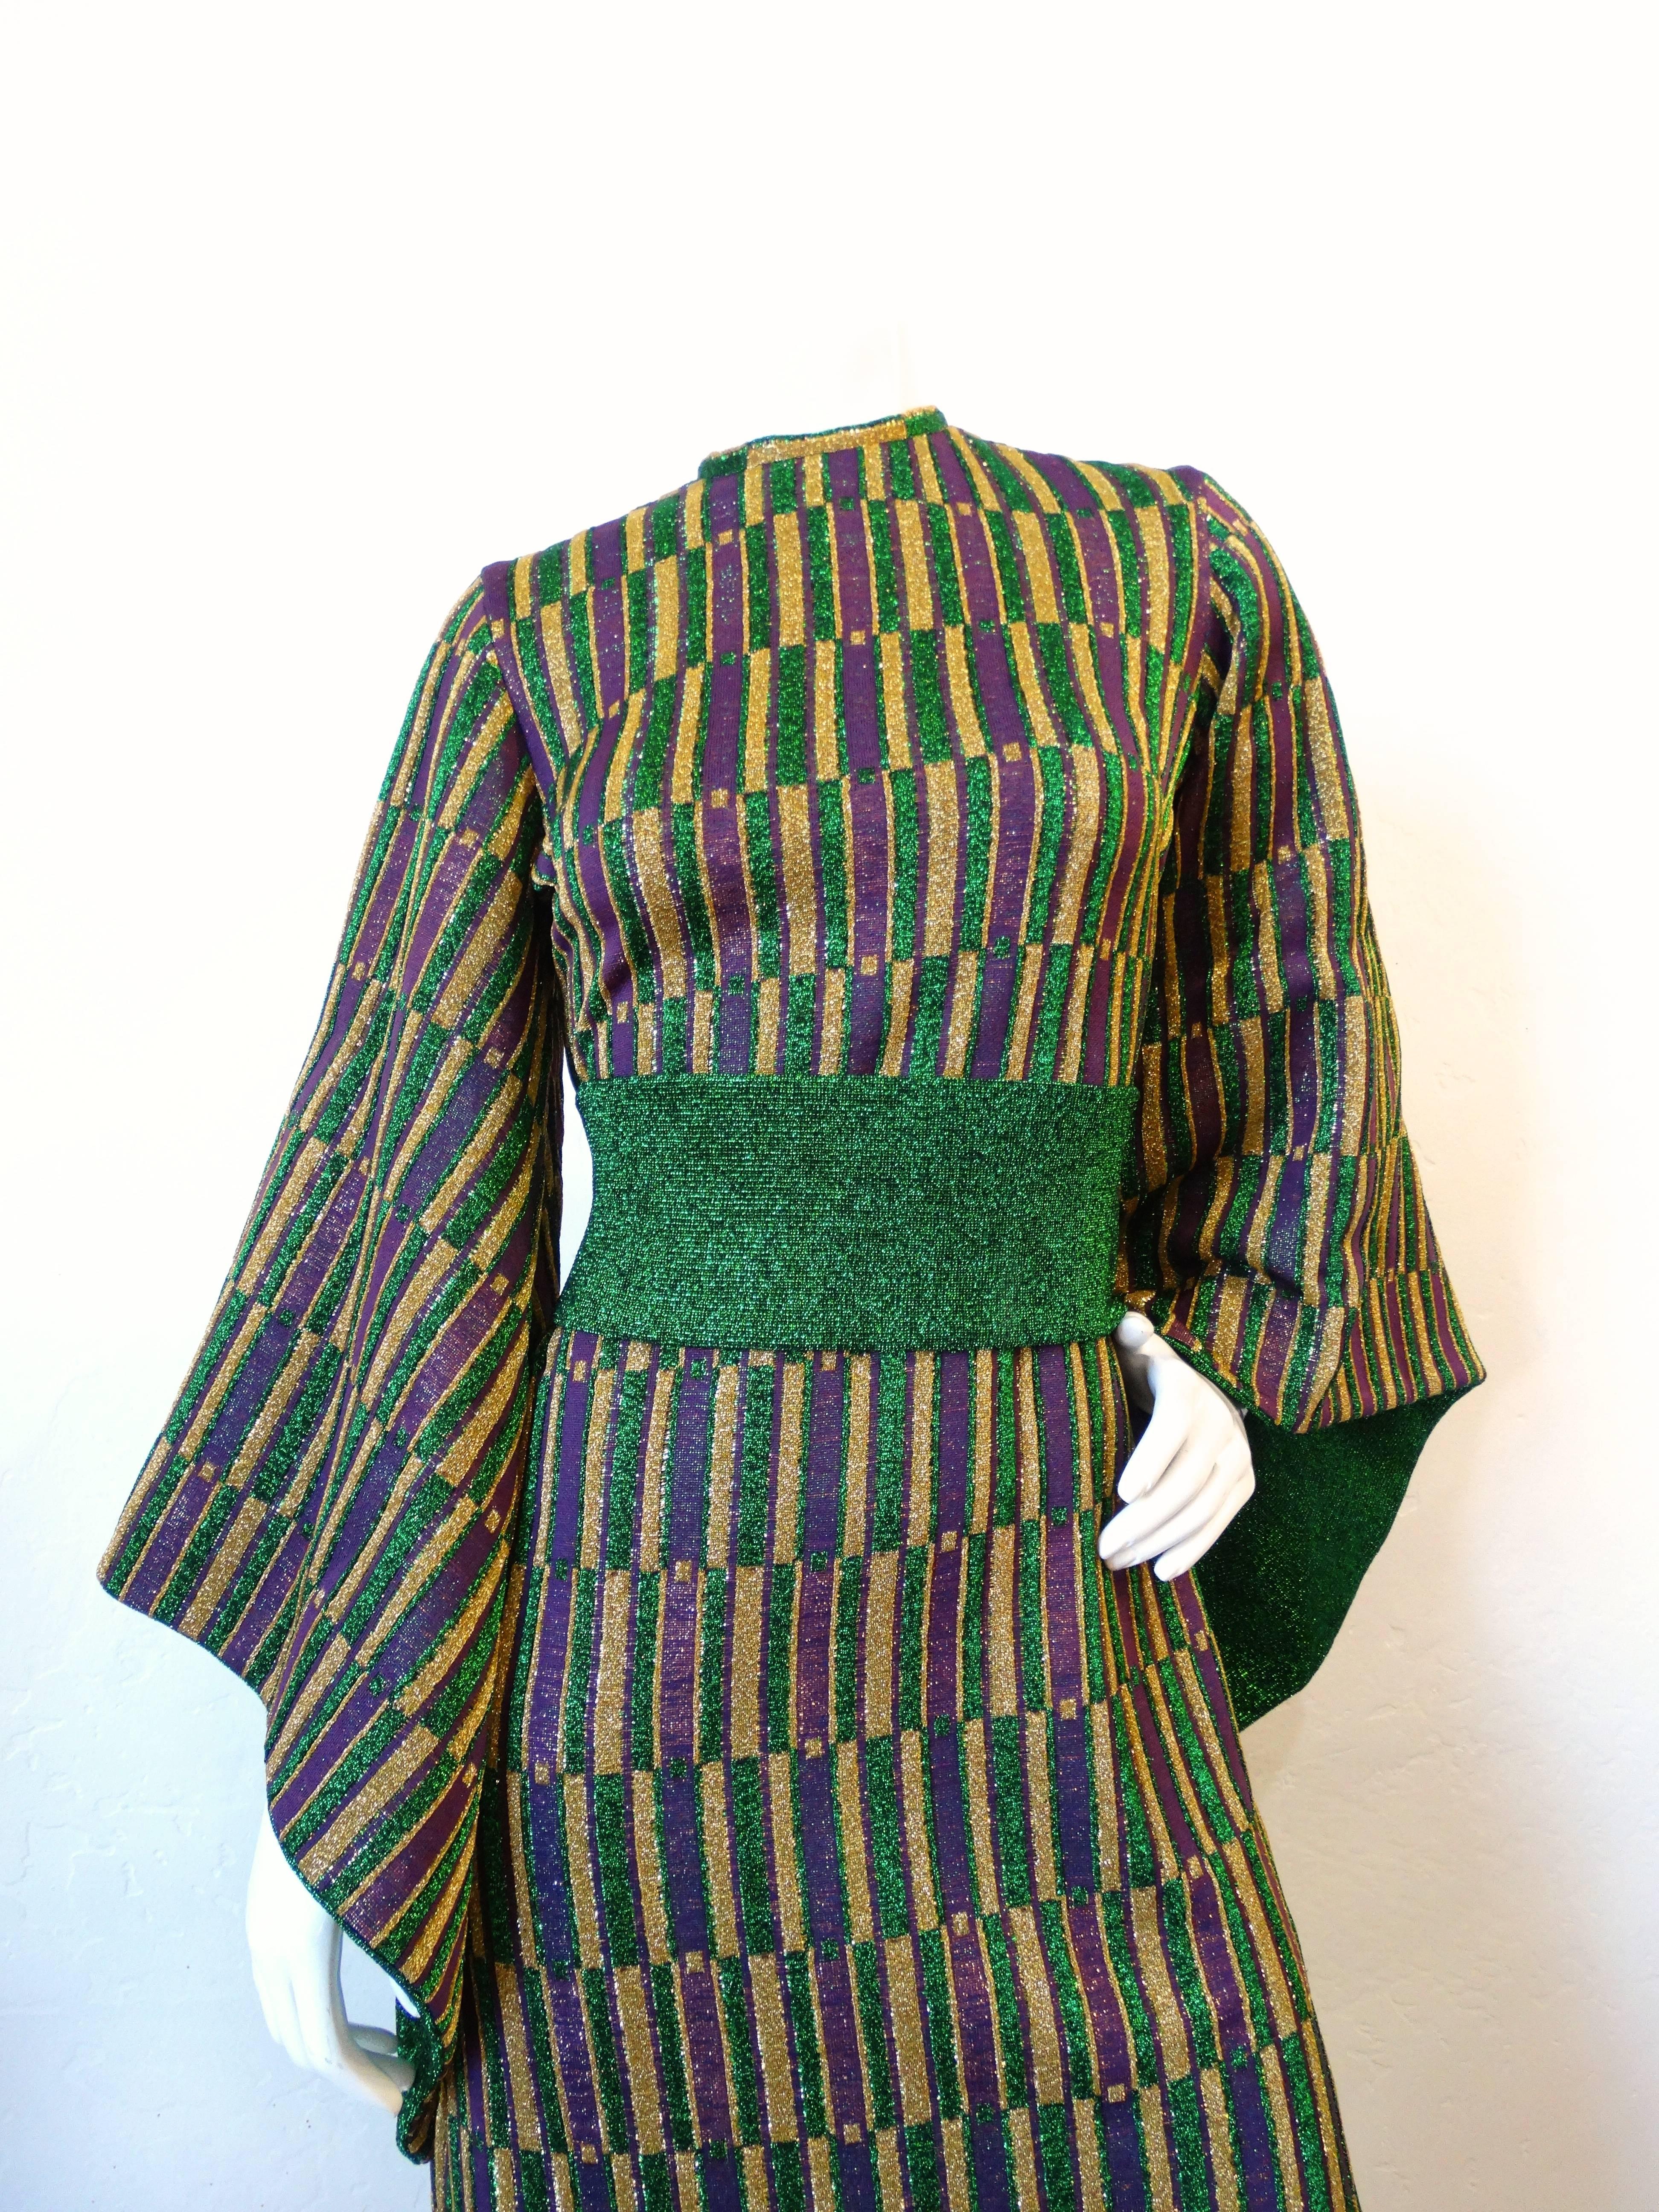 Incredible 1960s maxi gown- designed by Aled Couture of Israel! Dramatic angel wing sleeves, backed with green glittery fabric. Made of a metallic knit with purple, green and gold geometric print. Waist cinches with a green sash that buttons up the